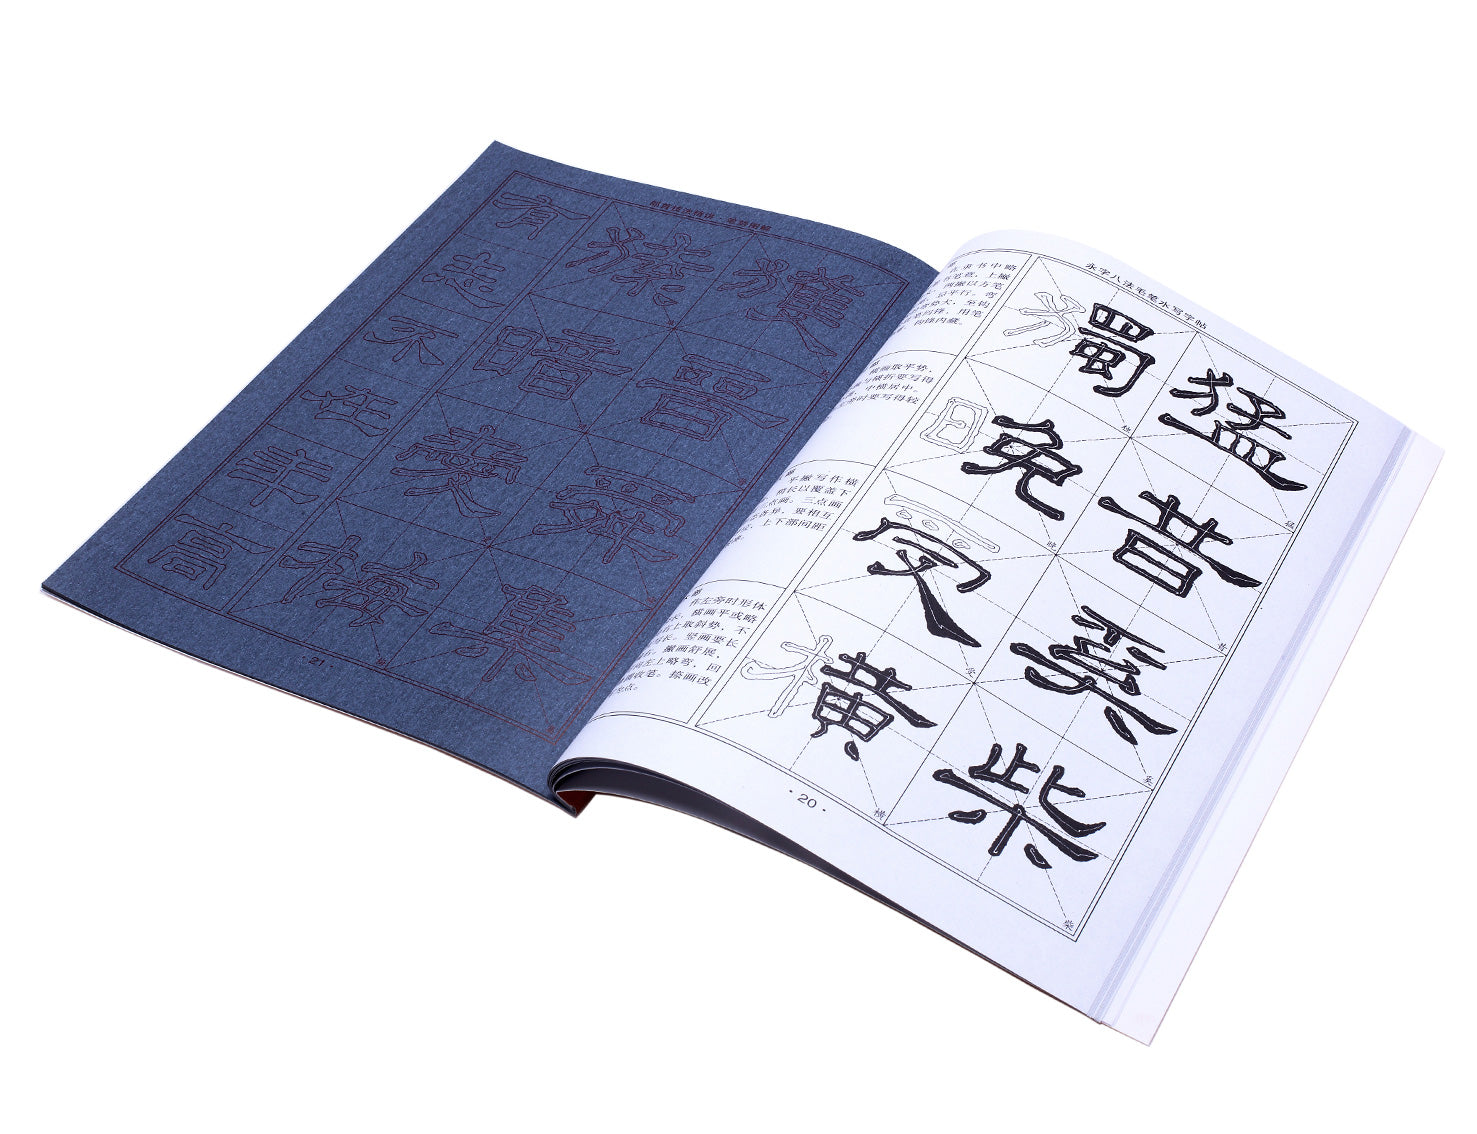 Li Shu style chinese calligraphy water paper book for practice - ASIAN  BRUSHPAINTER